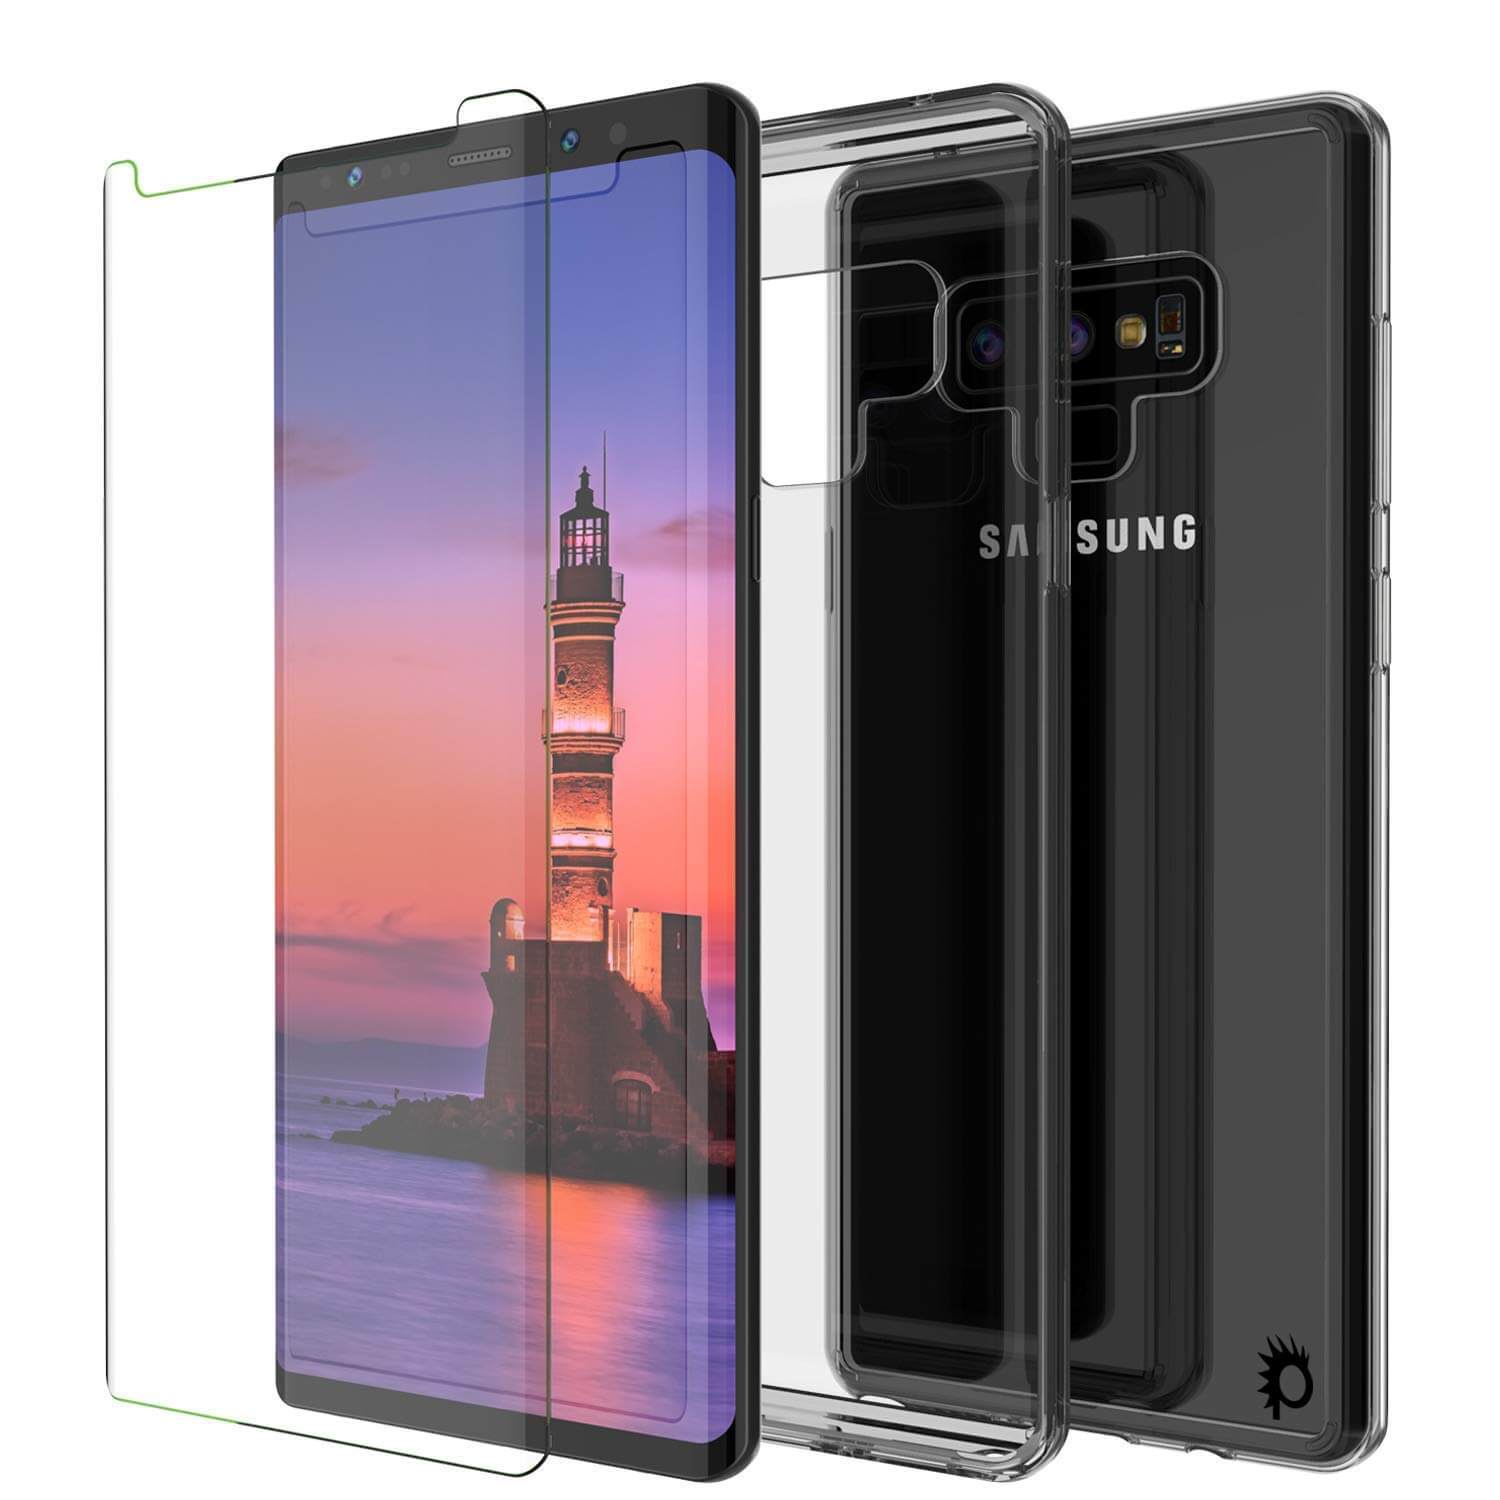 Galaxy Note 9 Punkcase Lucid-2.0 Series Slim Fit Armor Crystal Black Case Cover